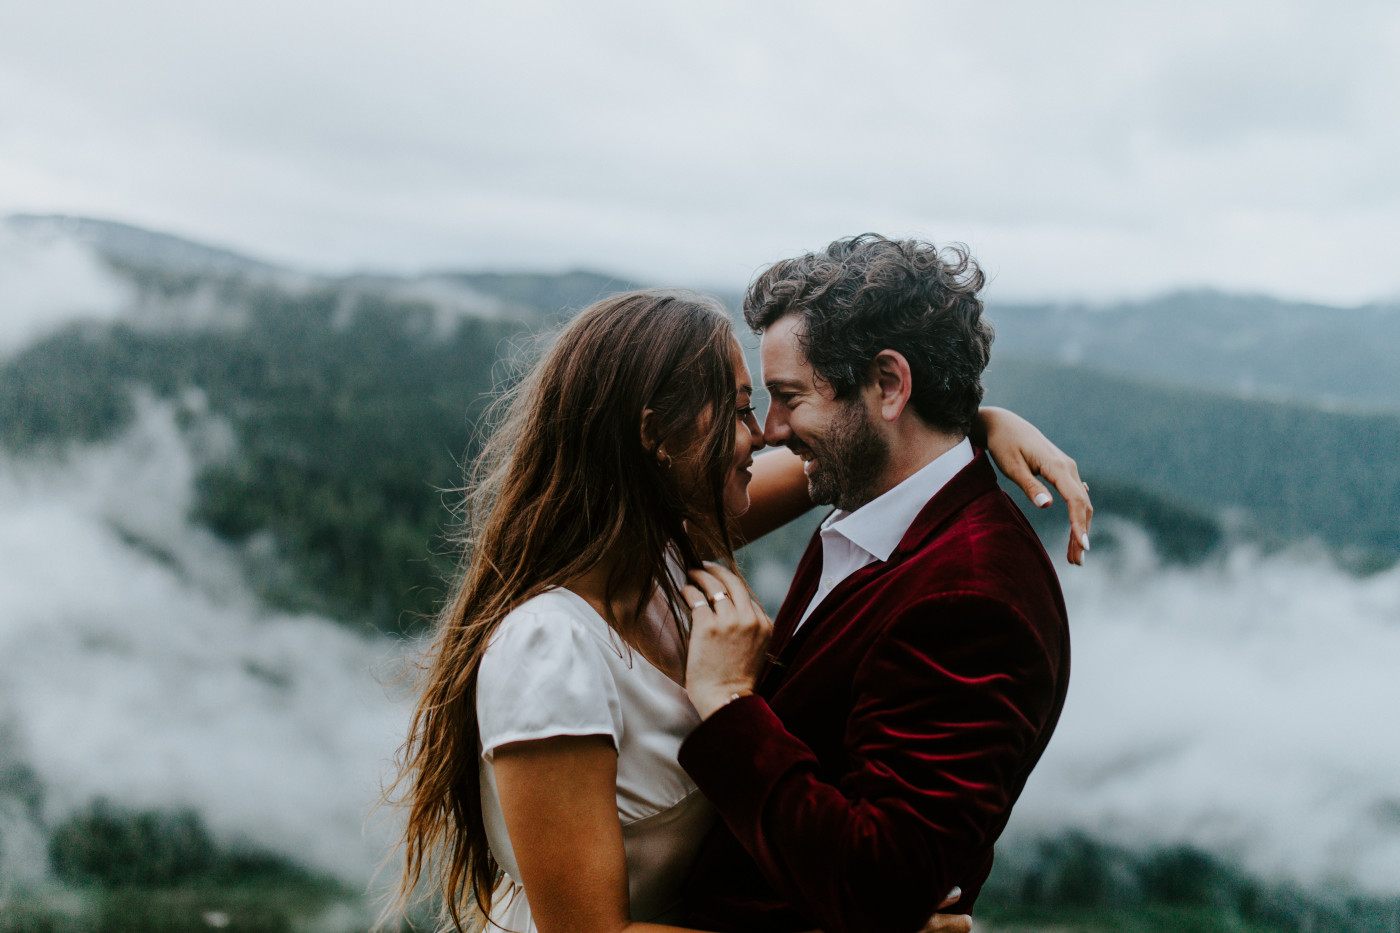 Katelyn and Murray share a moment. Elopement wedding photography at Mount Hood by Sienna Plus Josh.